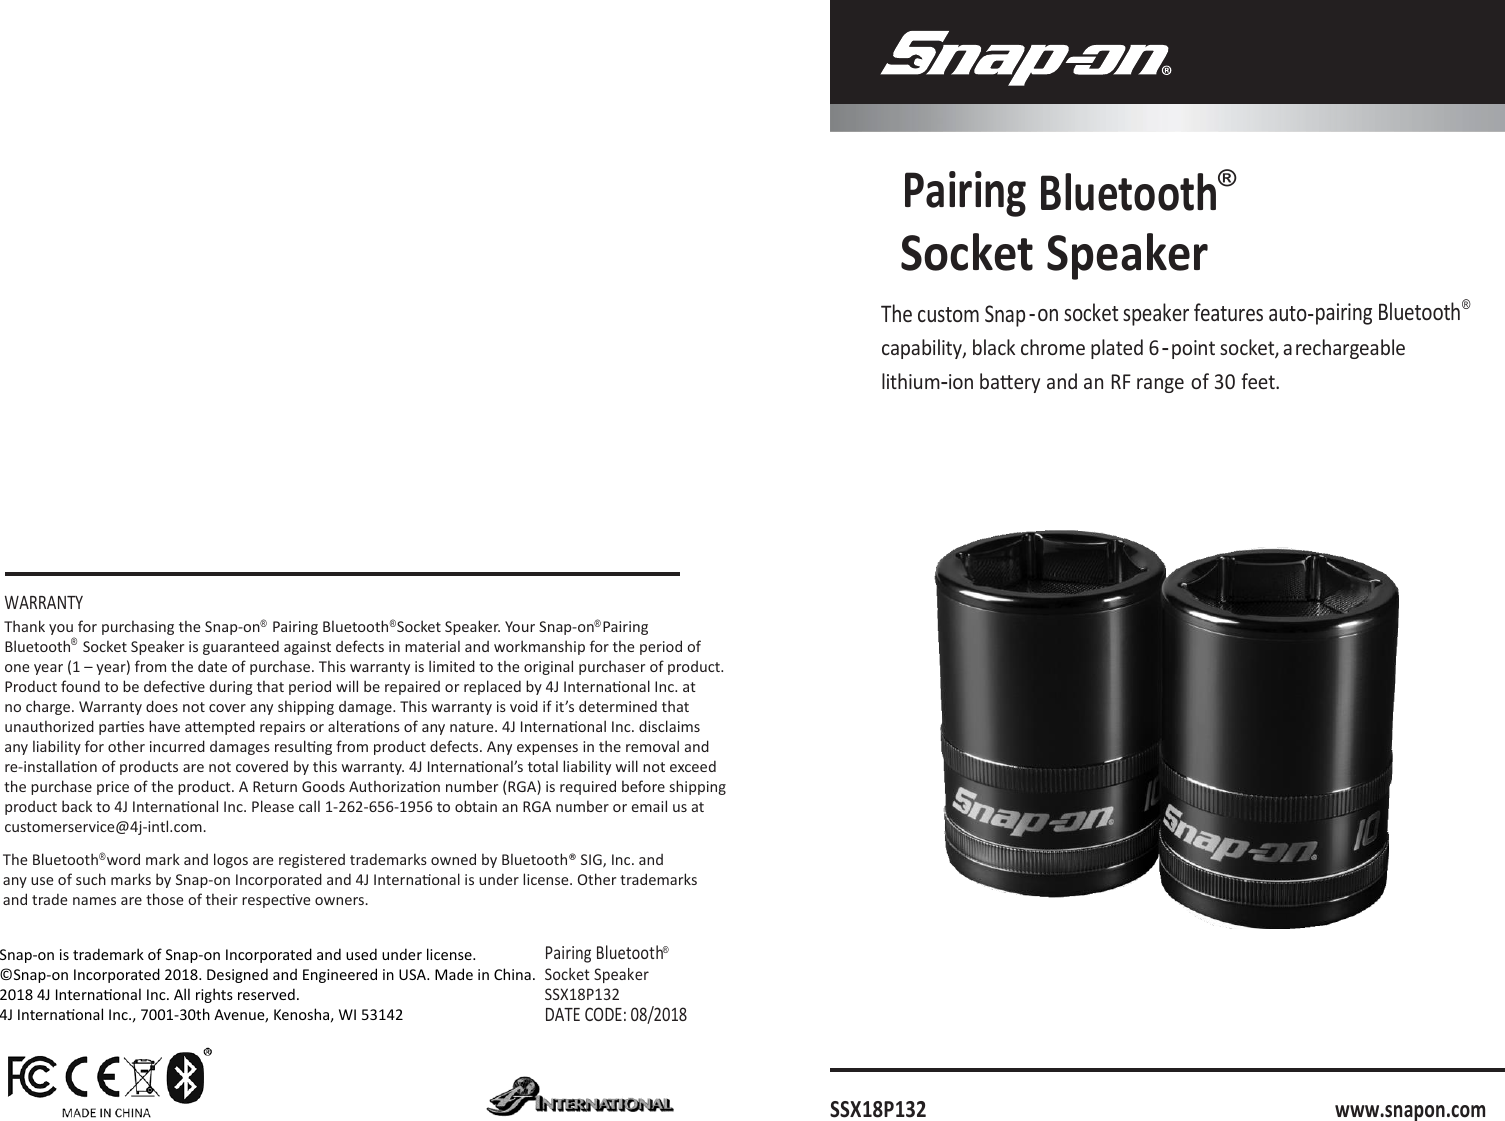   Pairing Bluetooth® Socket  Speaker The custom Snap -on socket speaker features auto-pairing Bluetooth® capability, black chrome plated 6-point socket, a rechargeable lithium-ion baery and an RF range of 30 feet.         WARRANTY      Pairing Bluetooth® Socket Speaker SSX18P132 DATE CODE: 08/2018      SSX18P132      www.snapon.com The Bluetooth  word mark and logos are registered trademarks owned by Bluetooth® SIG, Inc. and any use of such marks by Snap-on Incorporated and 4J Internaonal is under license. Other trademarks and trade names are those of their respecve owners.Thank you for purchasing the Snap-on   Pairing Bluetooth  Socket Speaker. Your Snap-on  PairingBluetooth   Socket Speaker is guaranteed against defects in material and workmanship for the period ofone year (1 – year) from the date of purchase. This warranty is limited to the original purchaser of product.Product found to be defecve during that period will be repaired or replaced by 4J Internaonal Inc. atno charge. Warranty does not cover any shipping damage. This warranty is void if it’s determined thatunauthorized pares have aempted repairs or alteraons of any nature. 4J Internaonal Inc. disclaimsany liability for other incurred damages resulng from product defects. Any expenses in the removal andre-installaon of products are not covered by this warranty. 4J Internaonal’s total liability will not exceedthe purchase price of the product. A Return Goods Authorizaon number (RGA) is required before shippingproduct back to 4J Internaonal Inc. Please call 1-262-656-1956 to obtain an RGA number or email us atcustomerservice@4j-intl.com.® ®  ® ® ®Snap-on is trademark of Snap-on Incorporated and used under license.©Snap-on Incorporated 2018. Designed and Engineered in USA. Made in China.2018 4J Internaonal Inc. All rights reserved.4J Internaonal Inc., 7001-30th Avenue, Kenosha, WI 53142